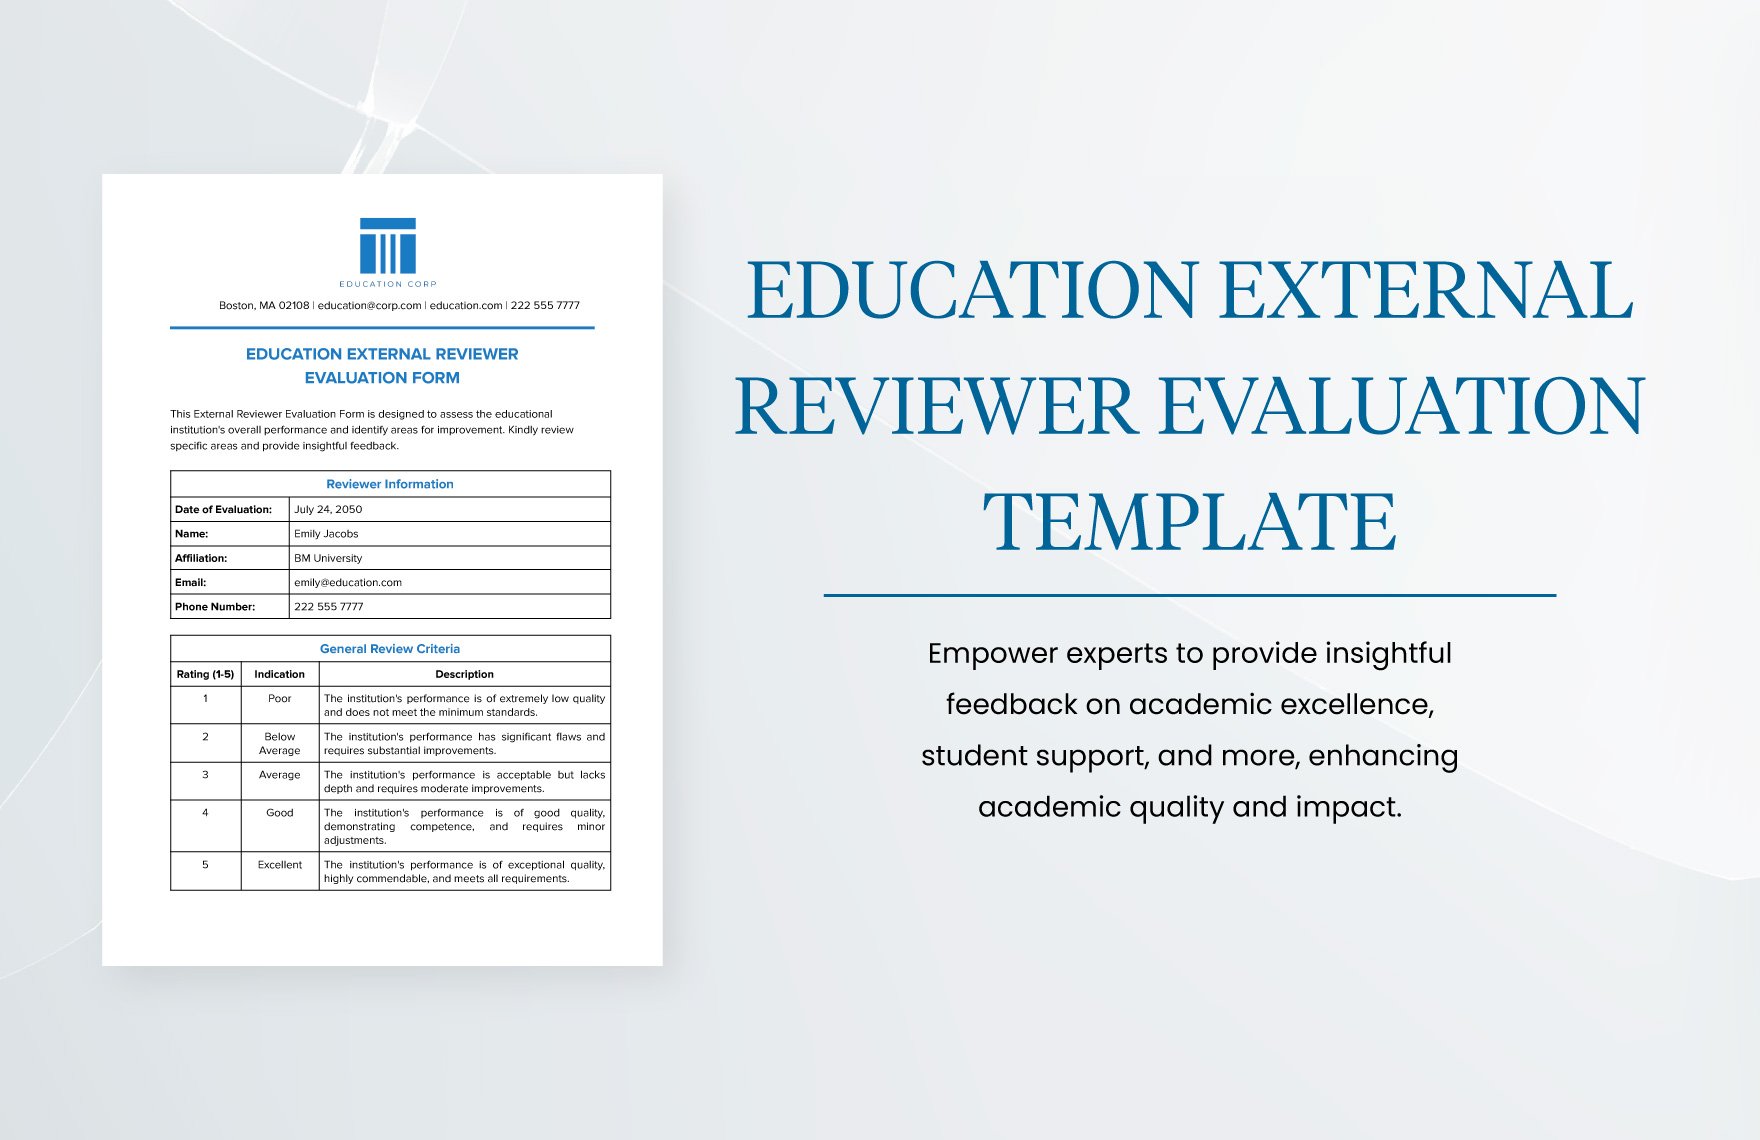 Education External Reviewer Evaluation Form Template in Word, Google Docs, PDF